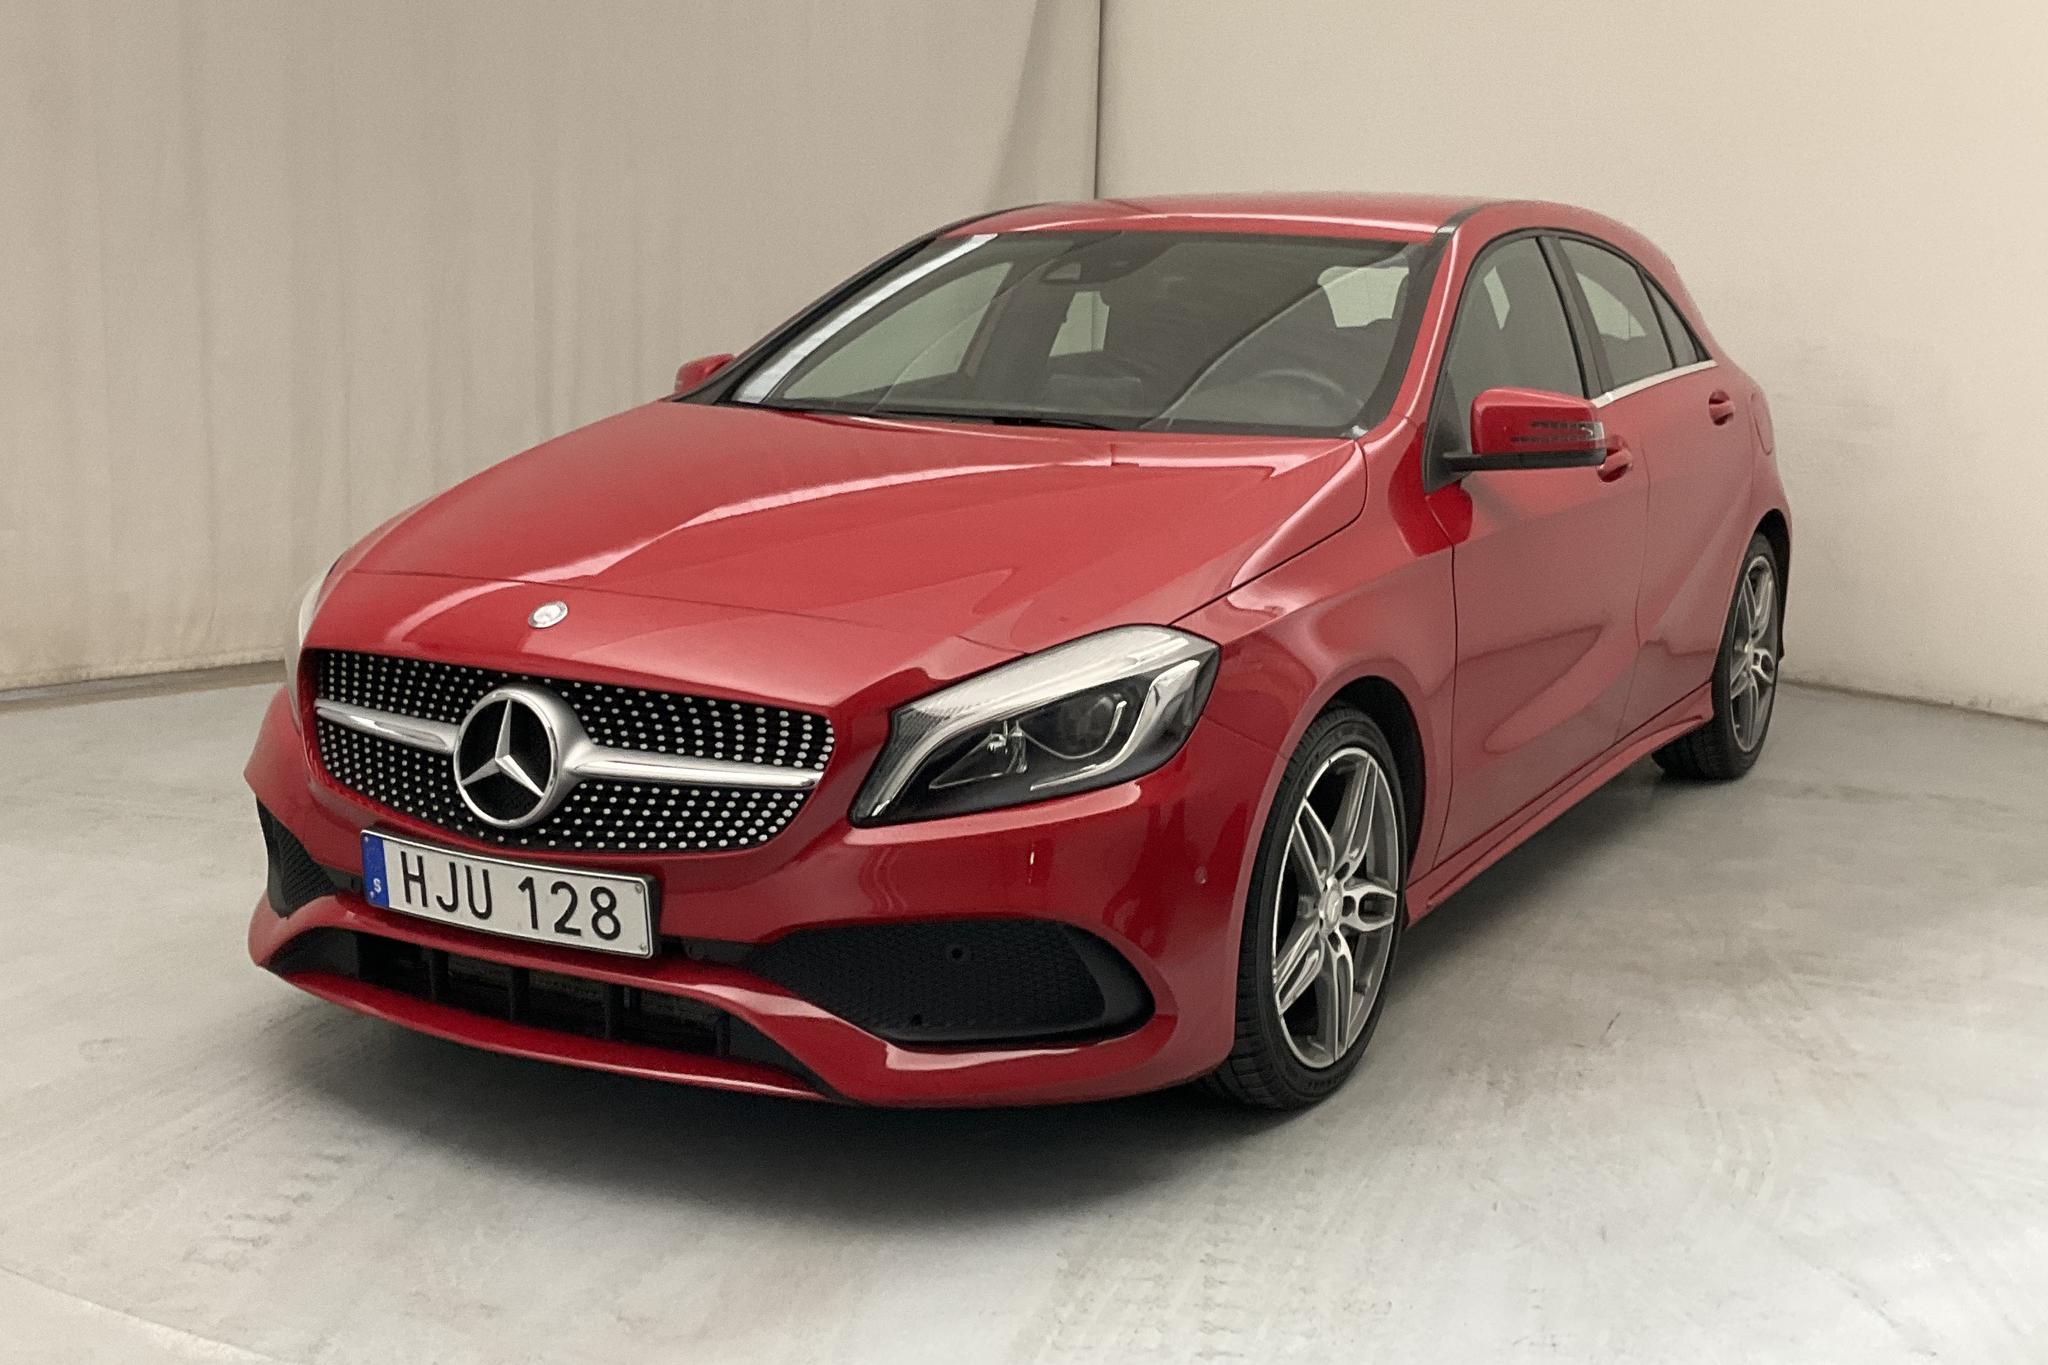 Mercedes A 180 CDI 5dr W176 (109hk) - 108 570 km - Automatic - red - 2016